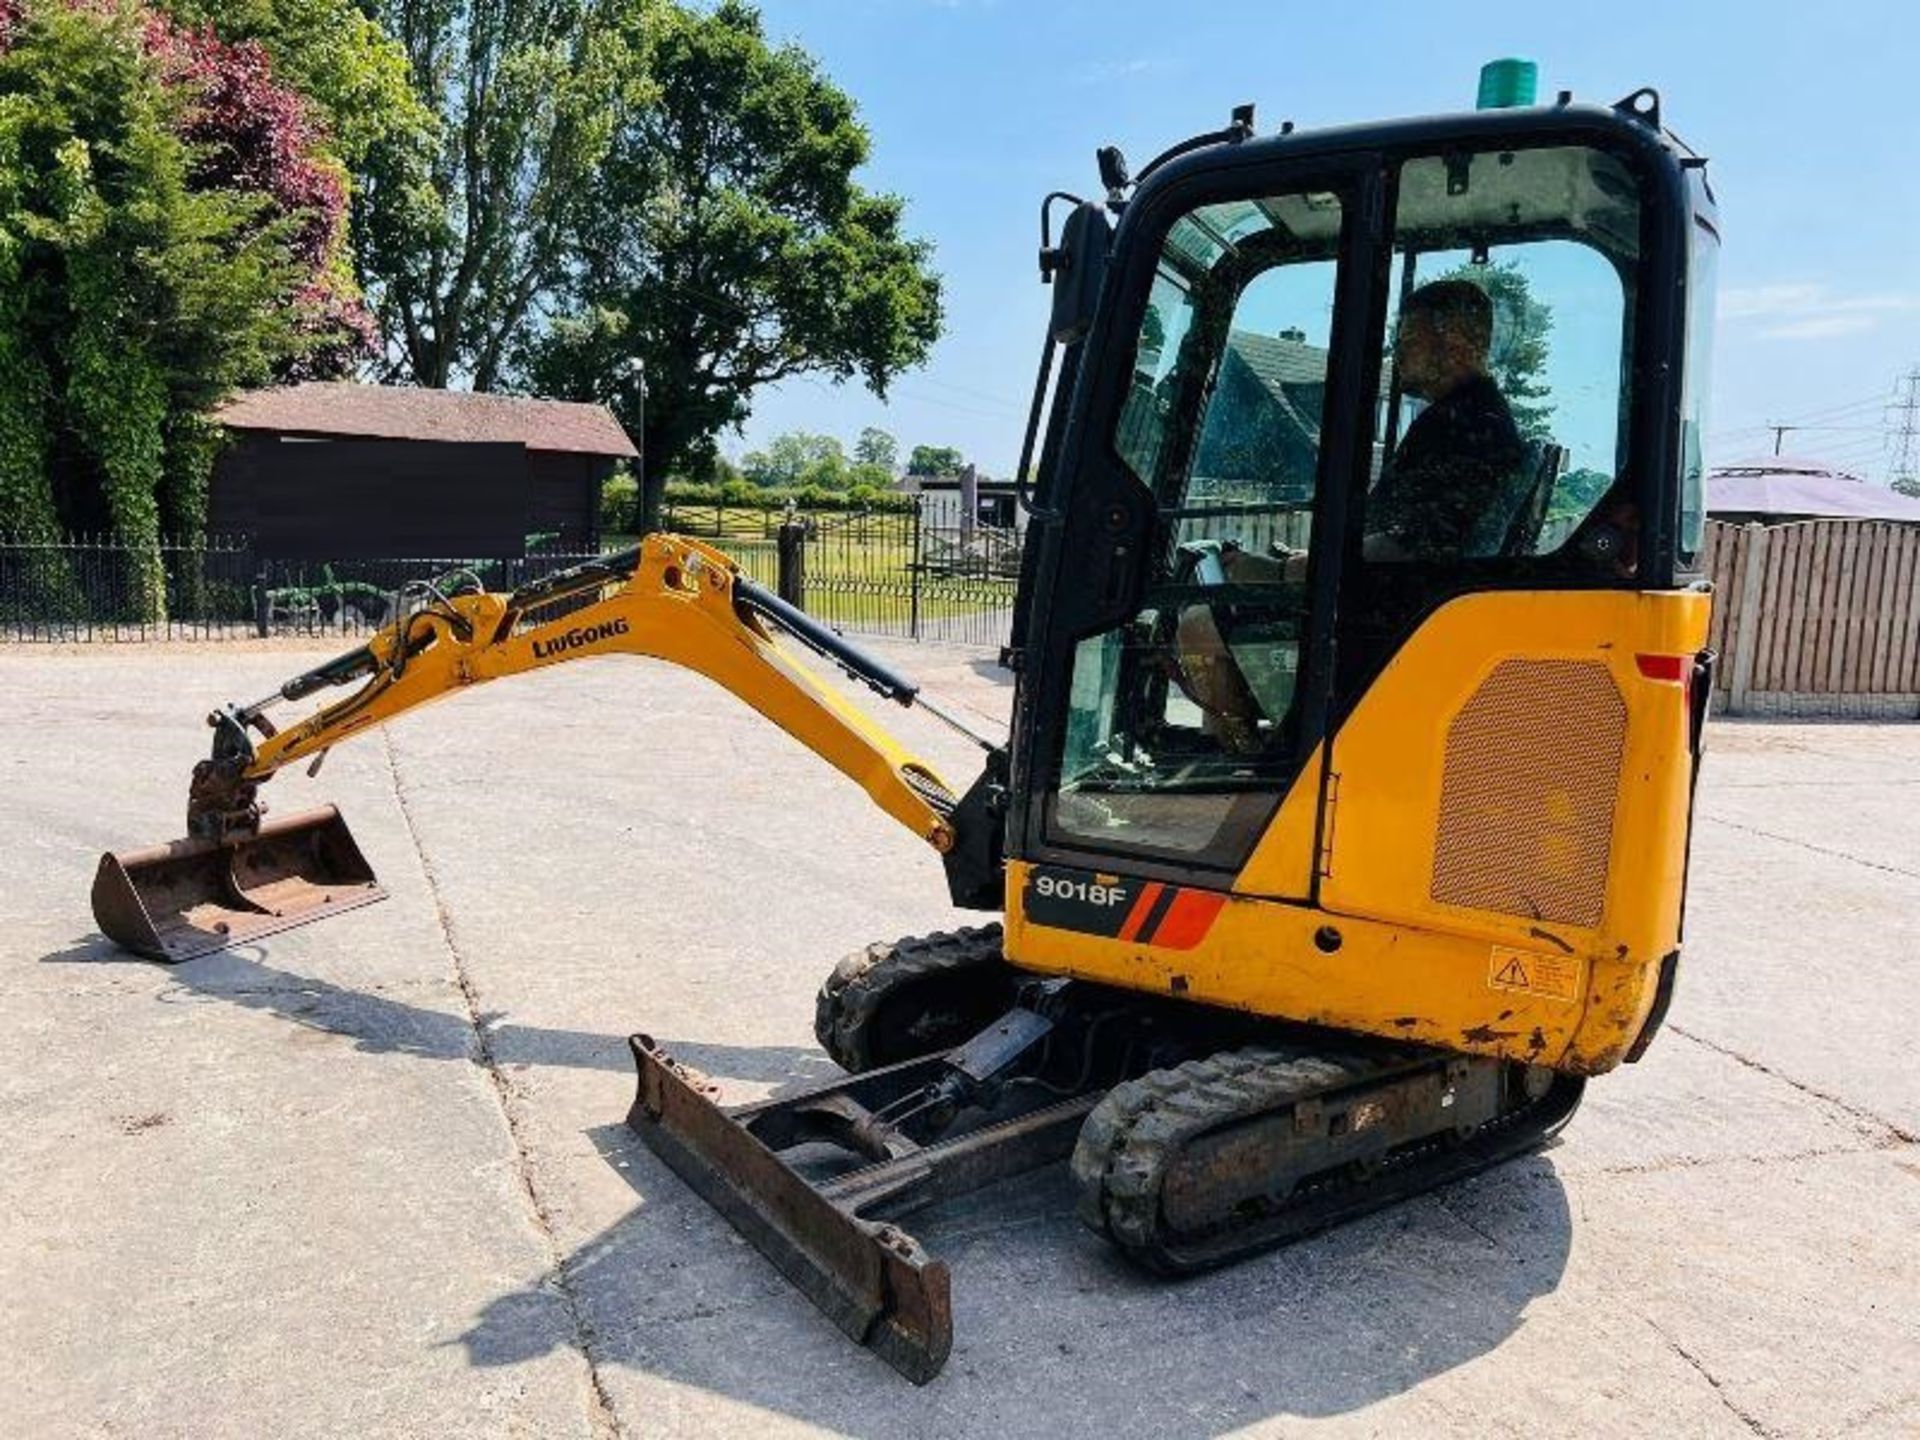 LIUGONG 9018F EXCAVATOR *YEAR 2020, 543 HOURS, ONE OWNER FROM NEW - Image 14 of 16